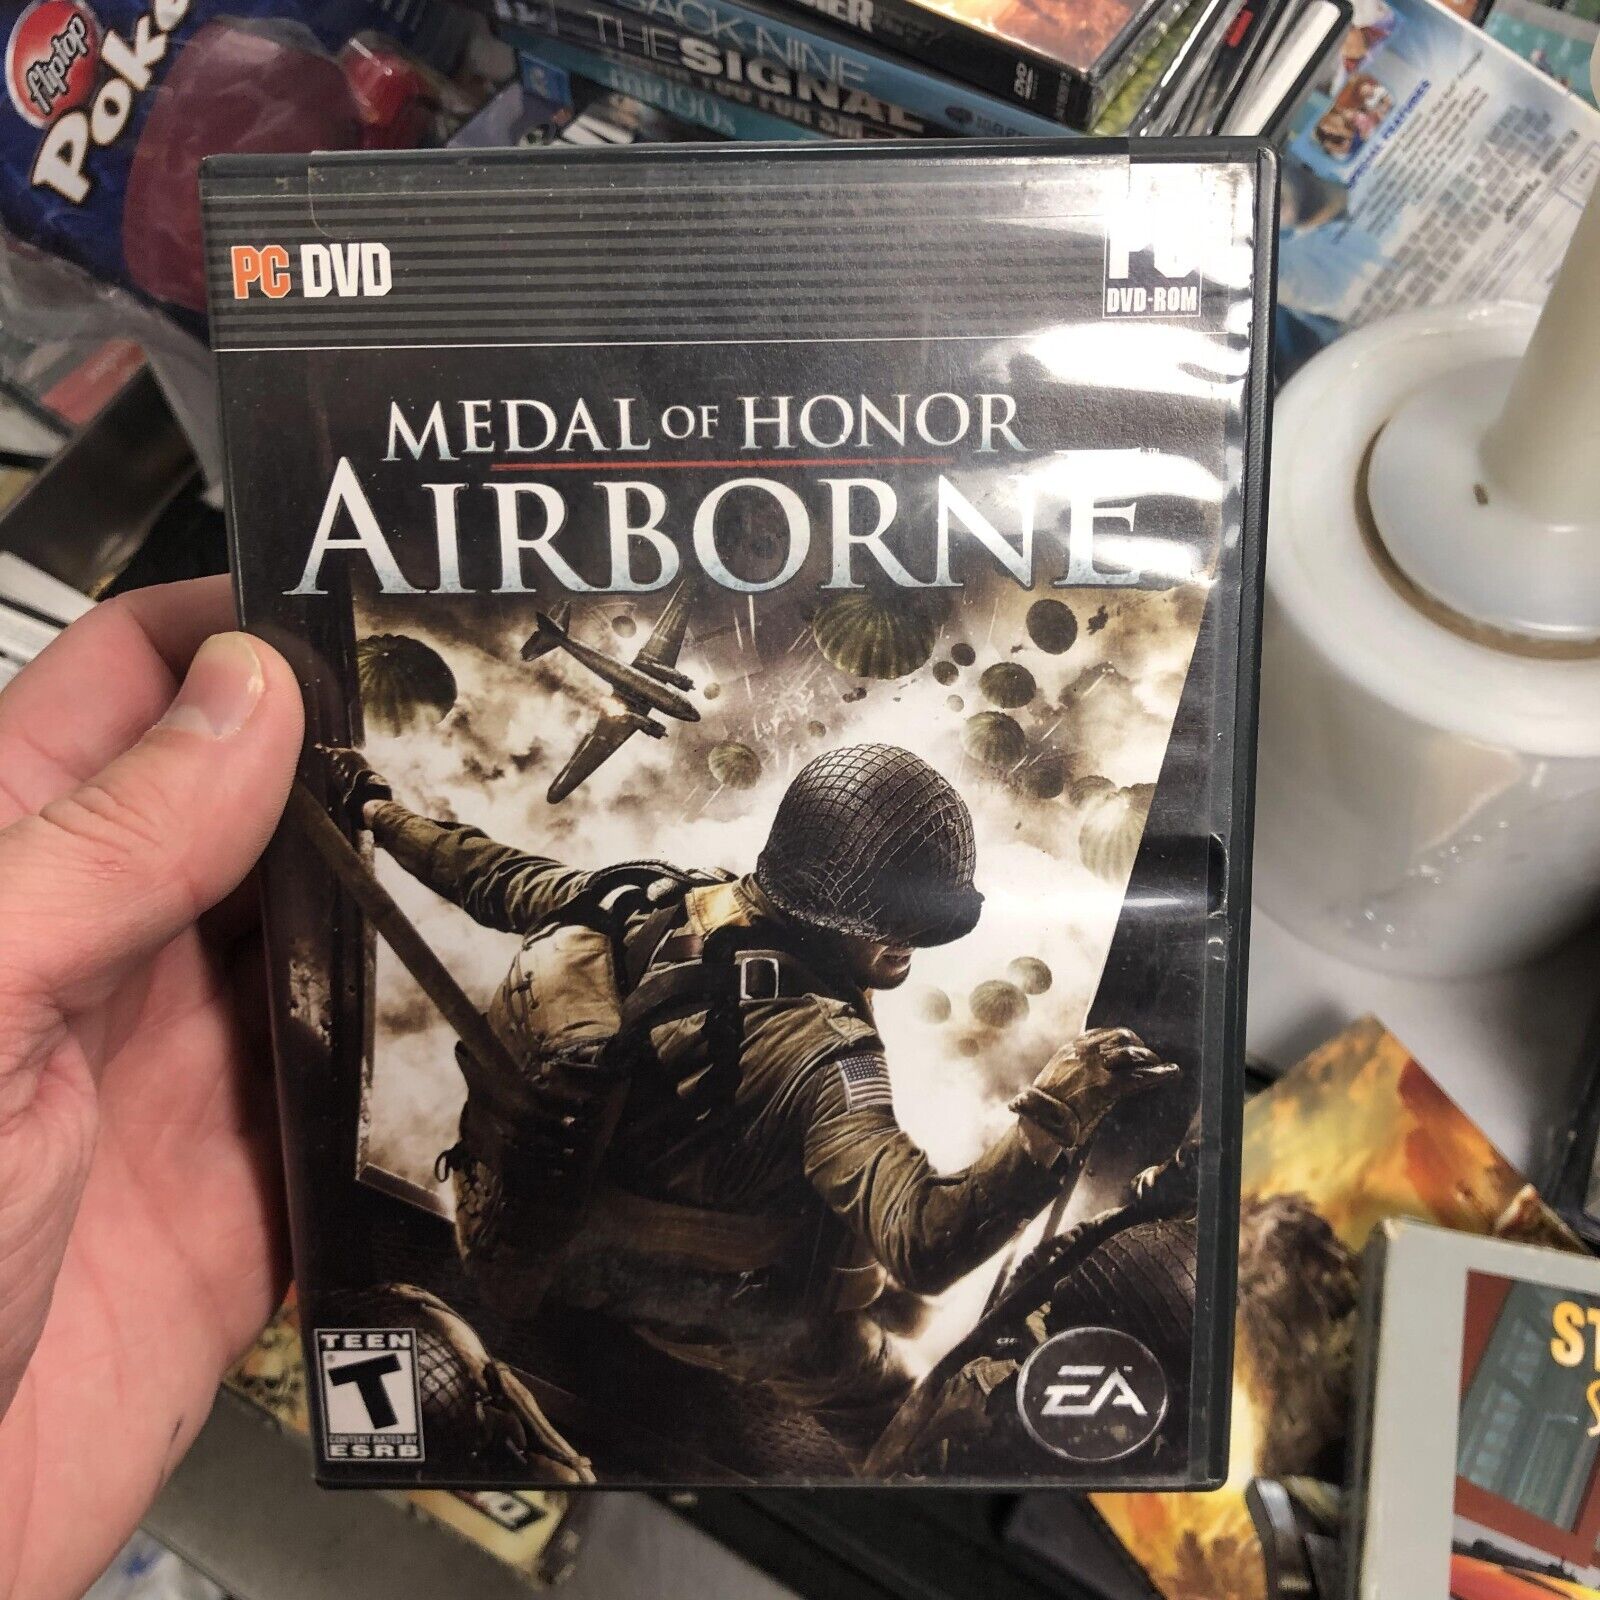 Medal of Honor: Airborne PC DVD 2007 WWII Historical Shooter Army Combat Game